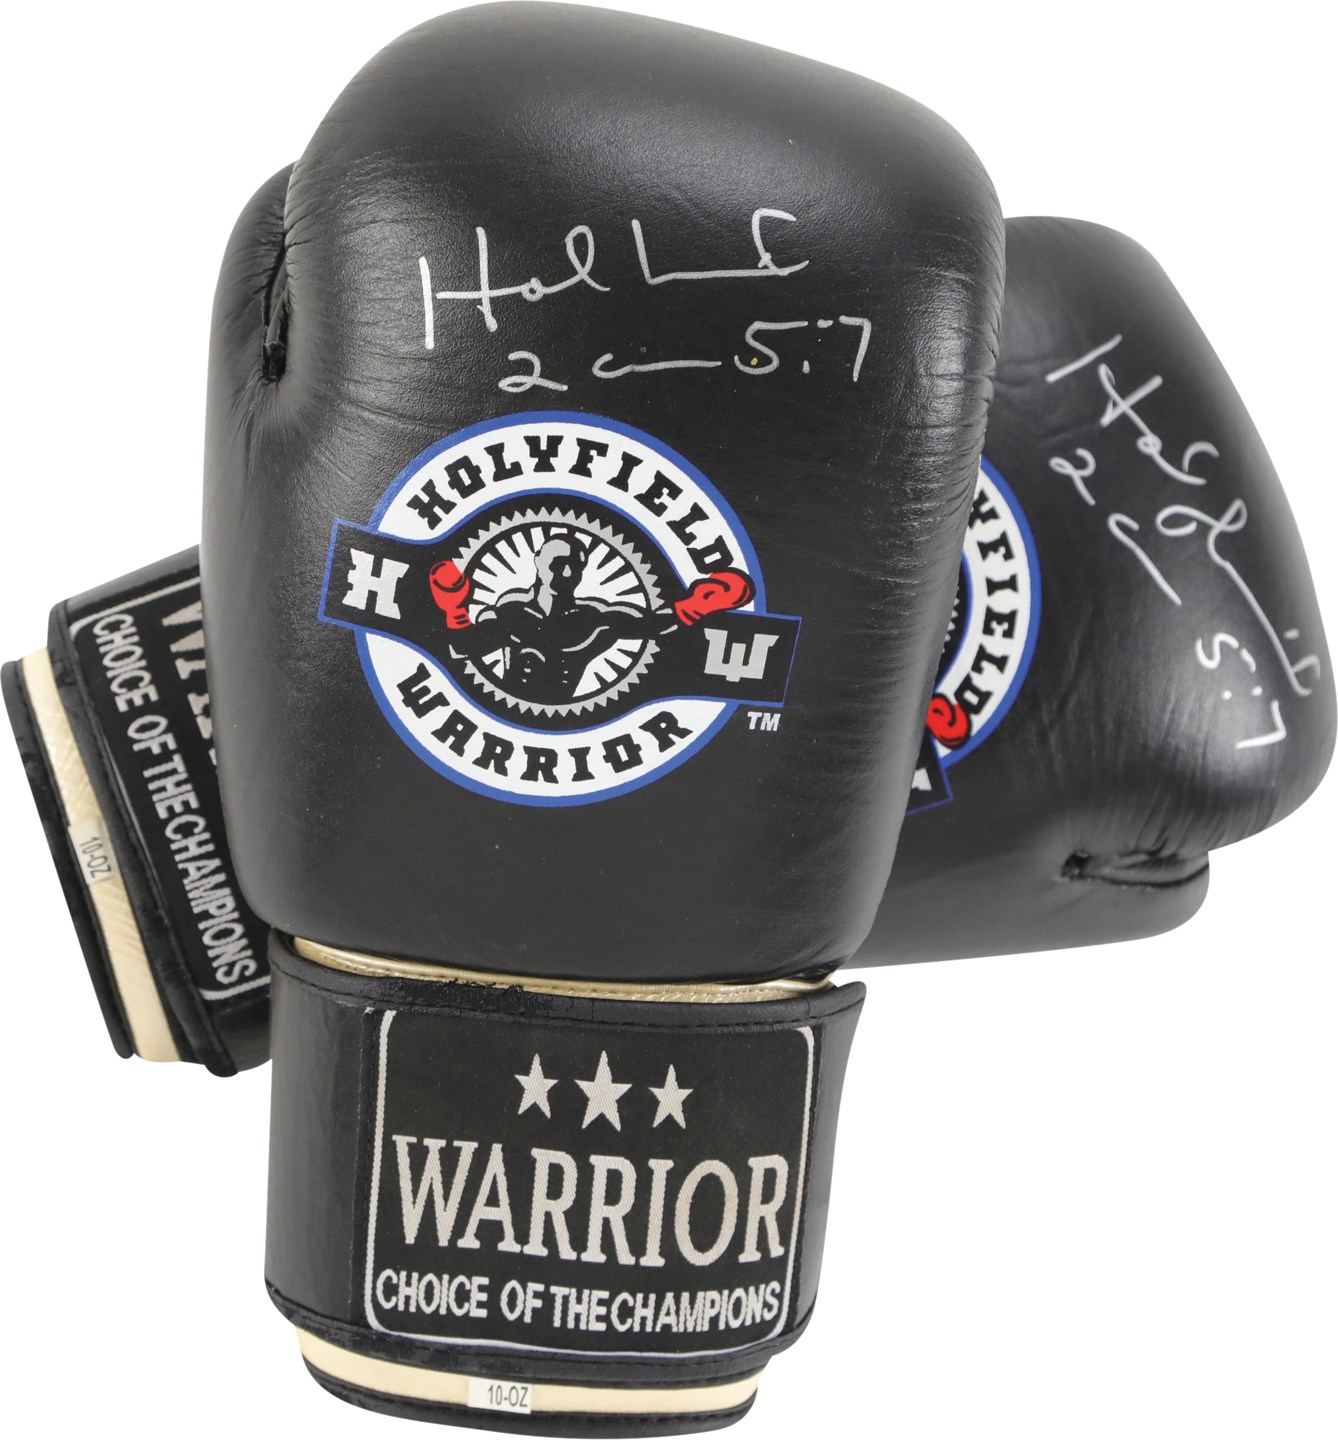 Muhammad Ali & Boxing - Evander Holyfield Signed Worn Gloves from Home Gym